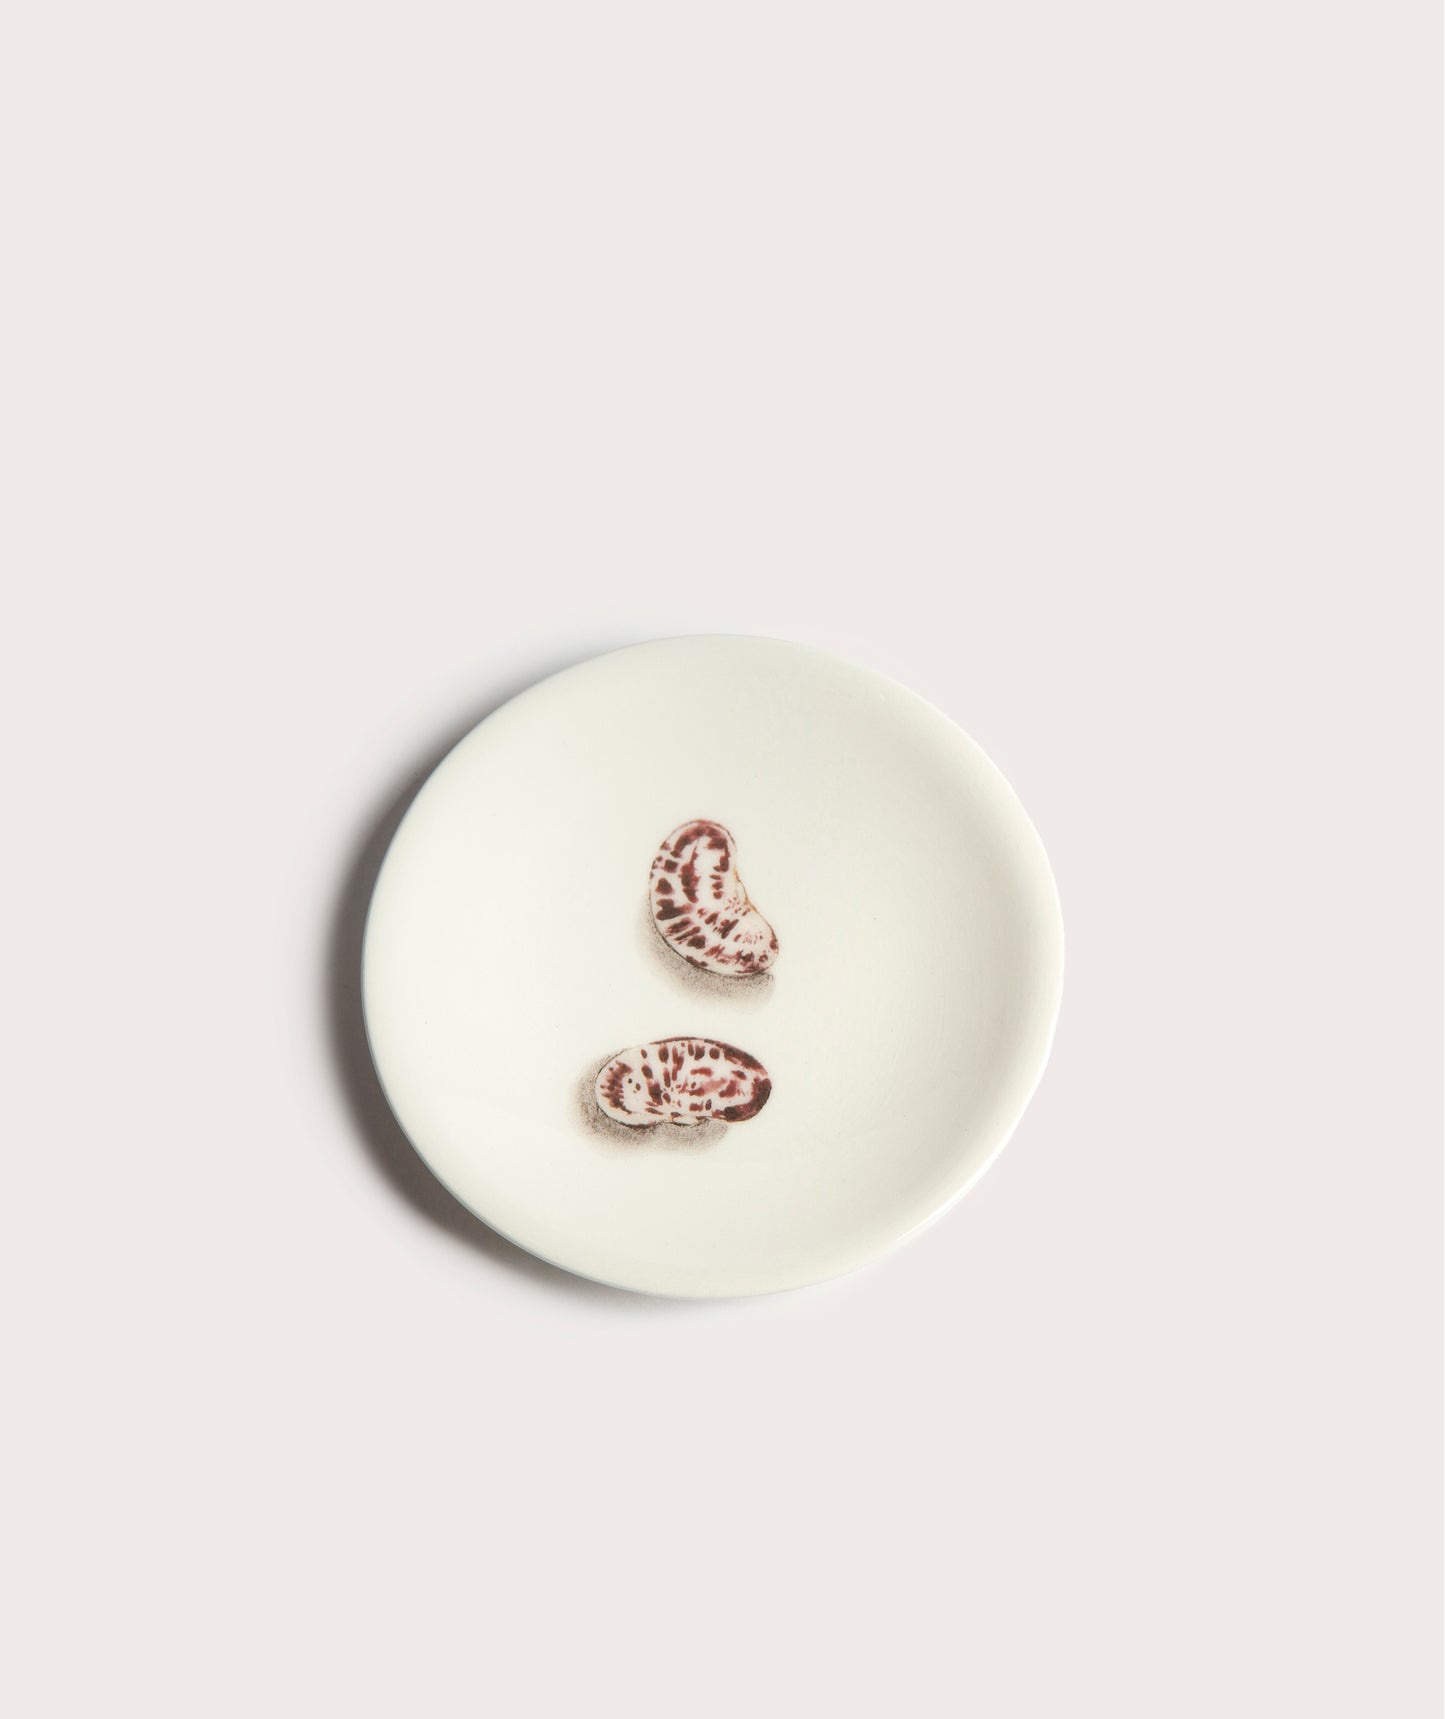 Tiny Plate with Bean Trompe L'oeil